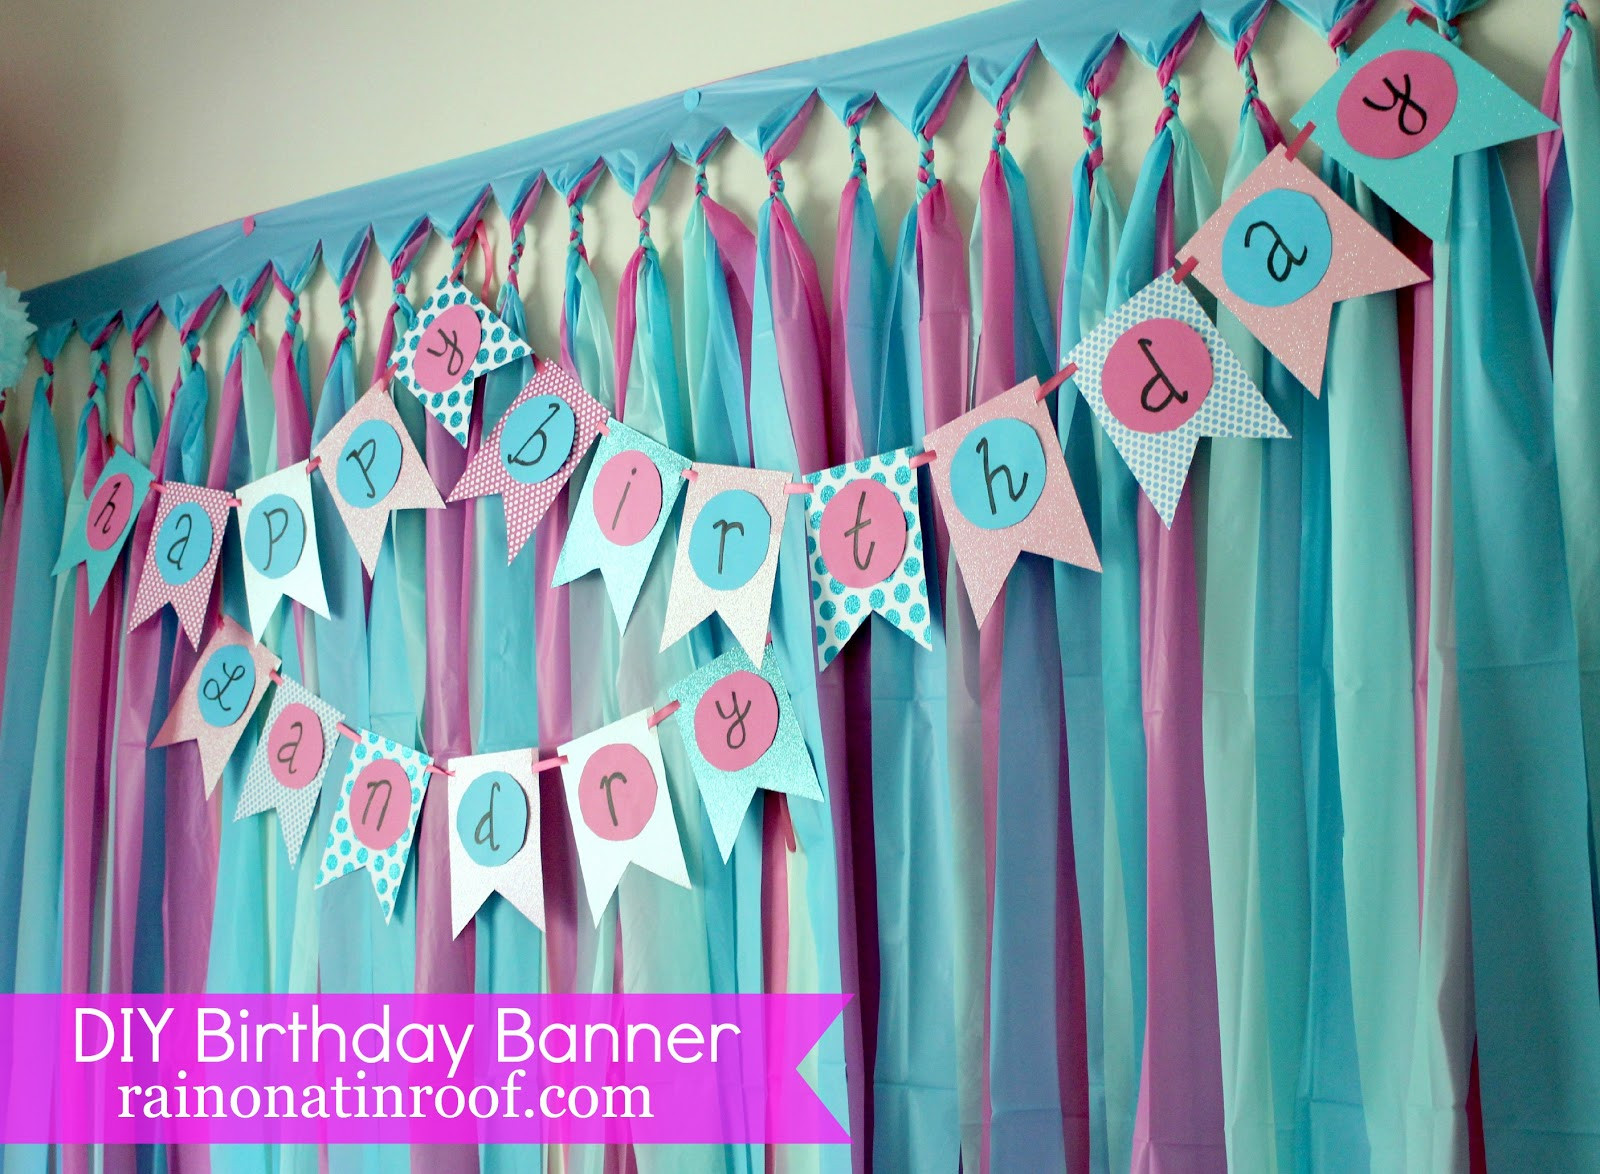 Birthday Party Decorations Diy
 Easiest Ever DIY Birthday Banner Part 2 Rain on a Tin Roof